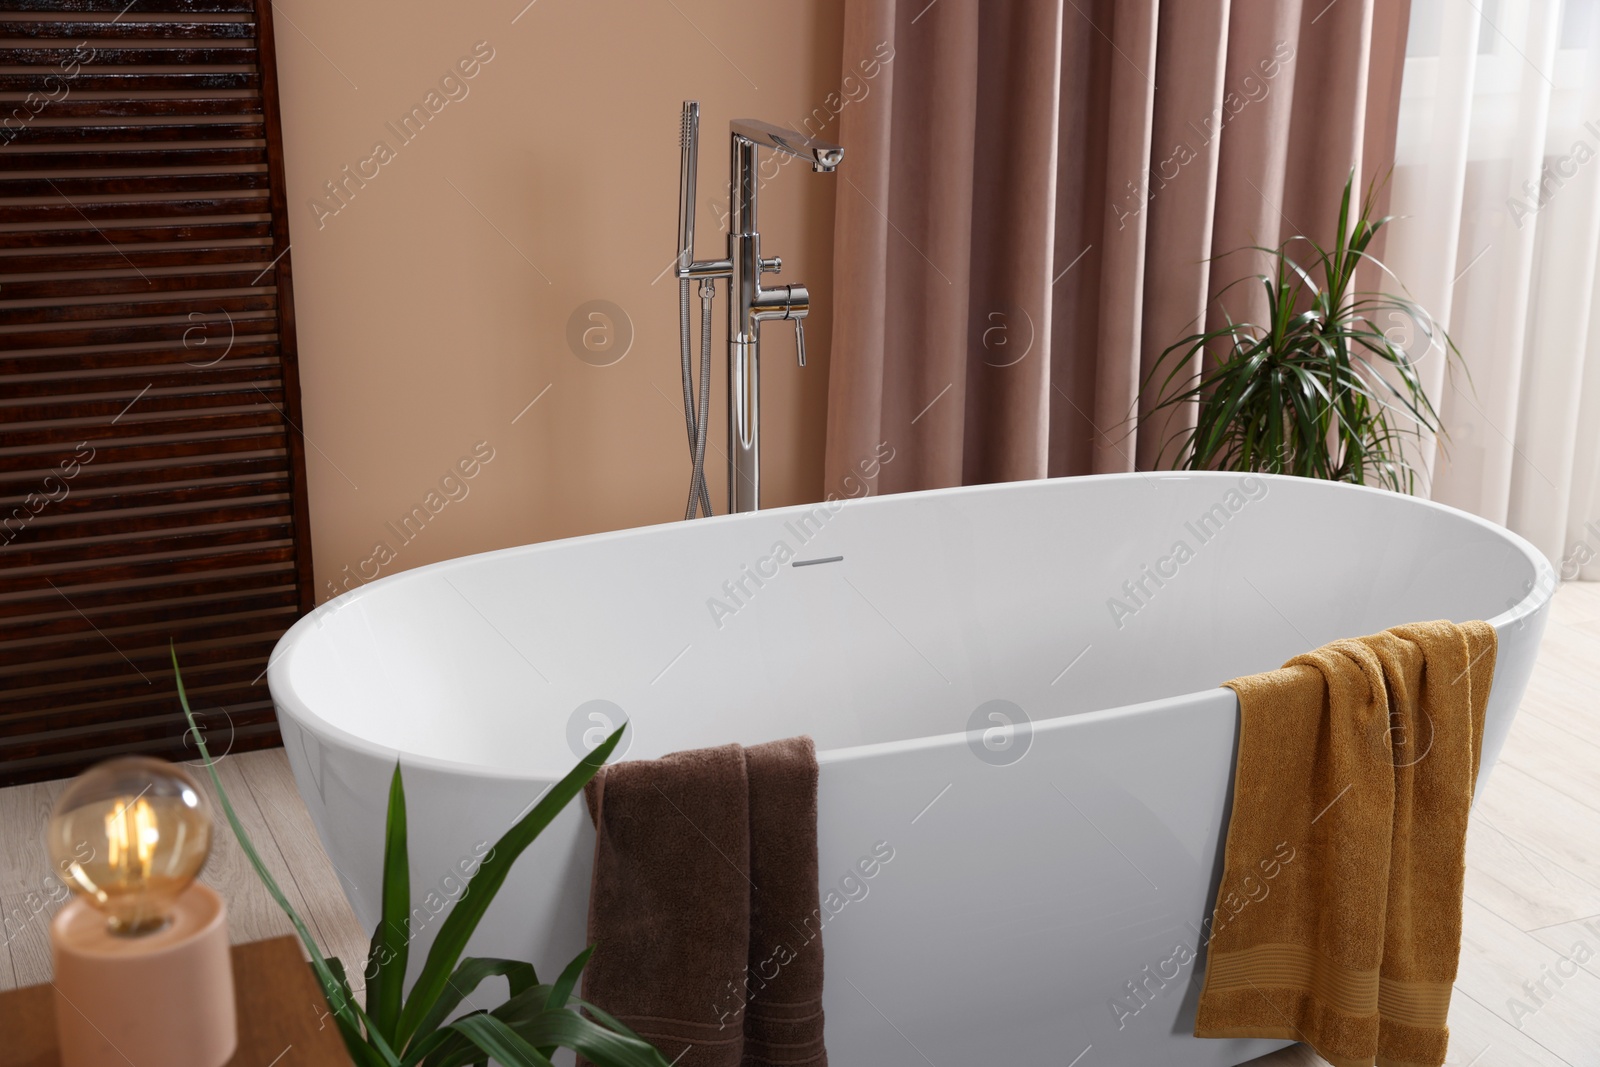 Photo of Stylish bathroom interior with ceramic tub, terry towels and houseplants